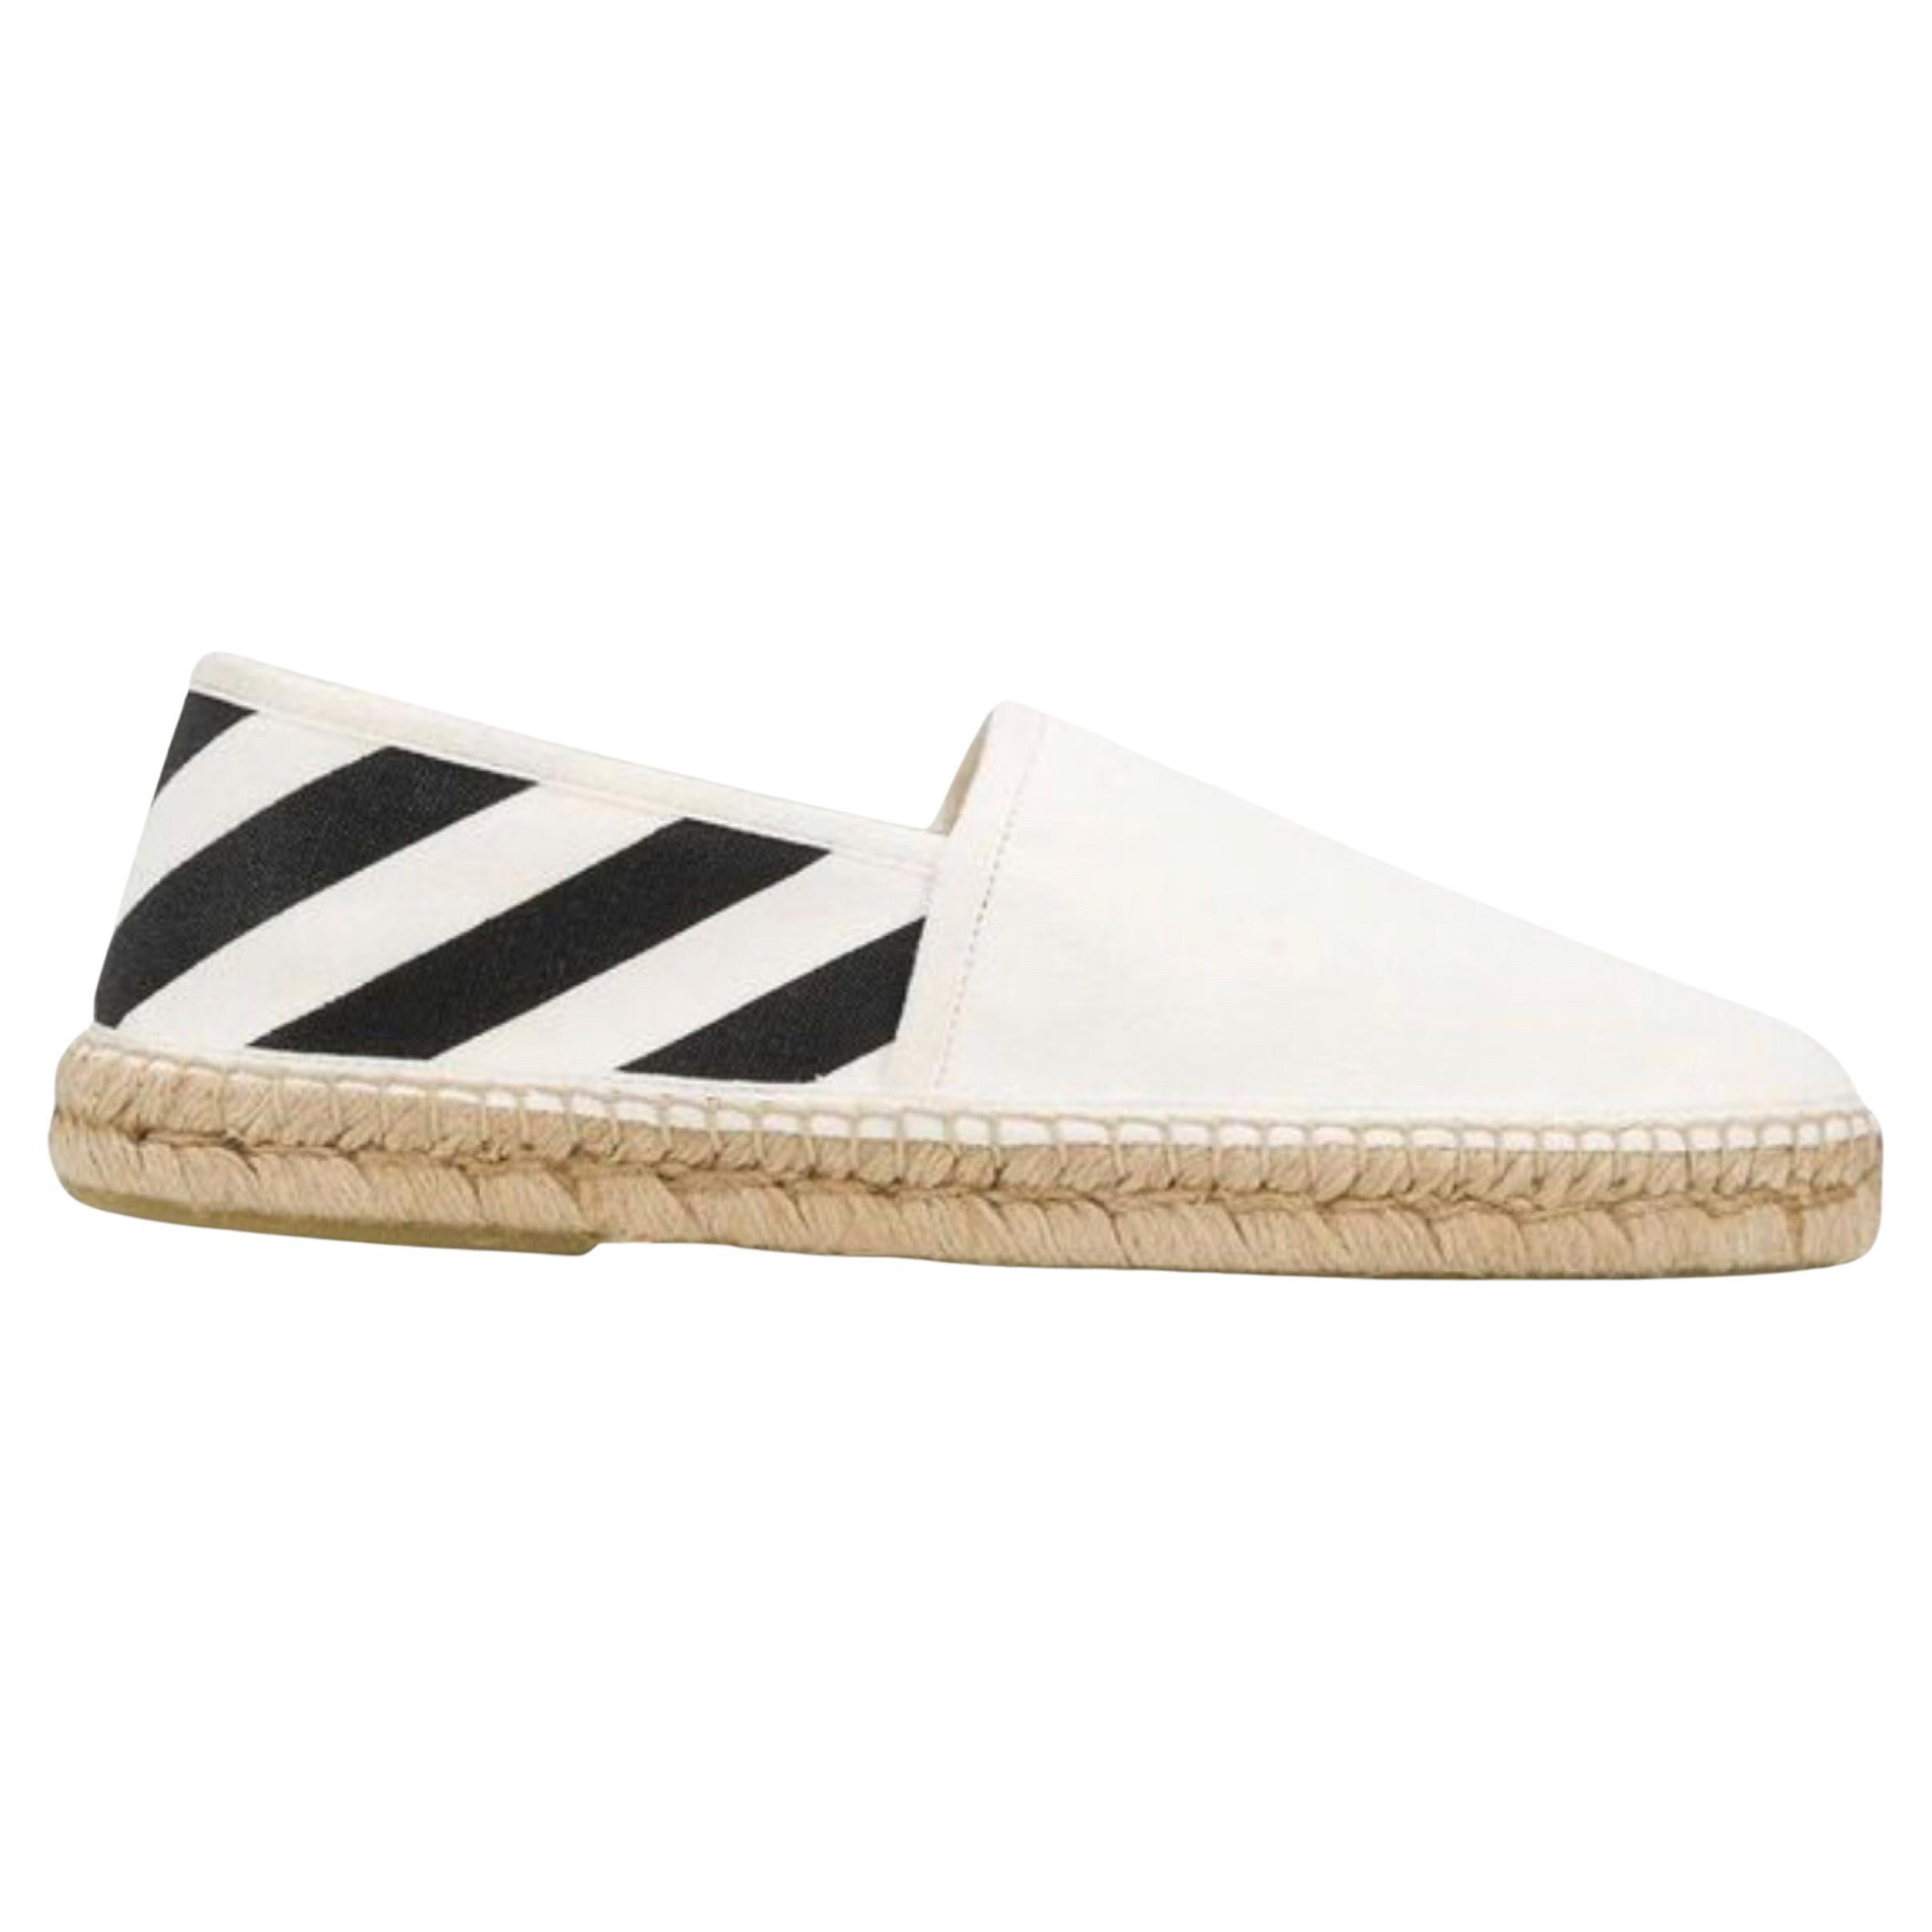 NEW Off-White Virgil Abloh White Striped Espadrilles Shoes For Sale